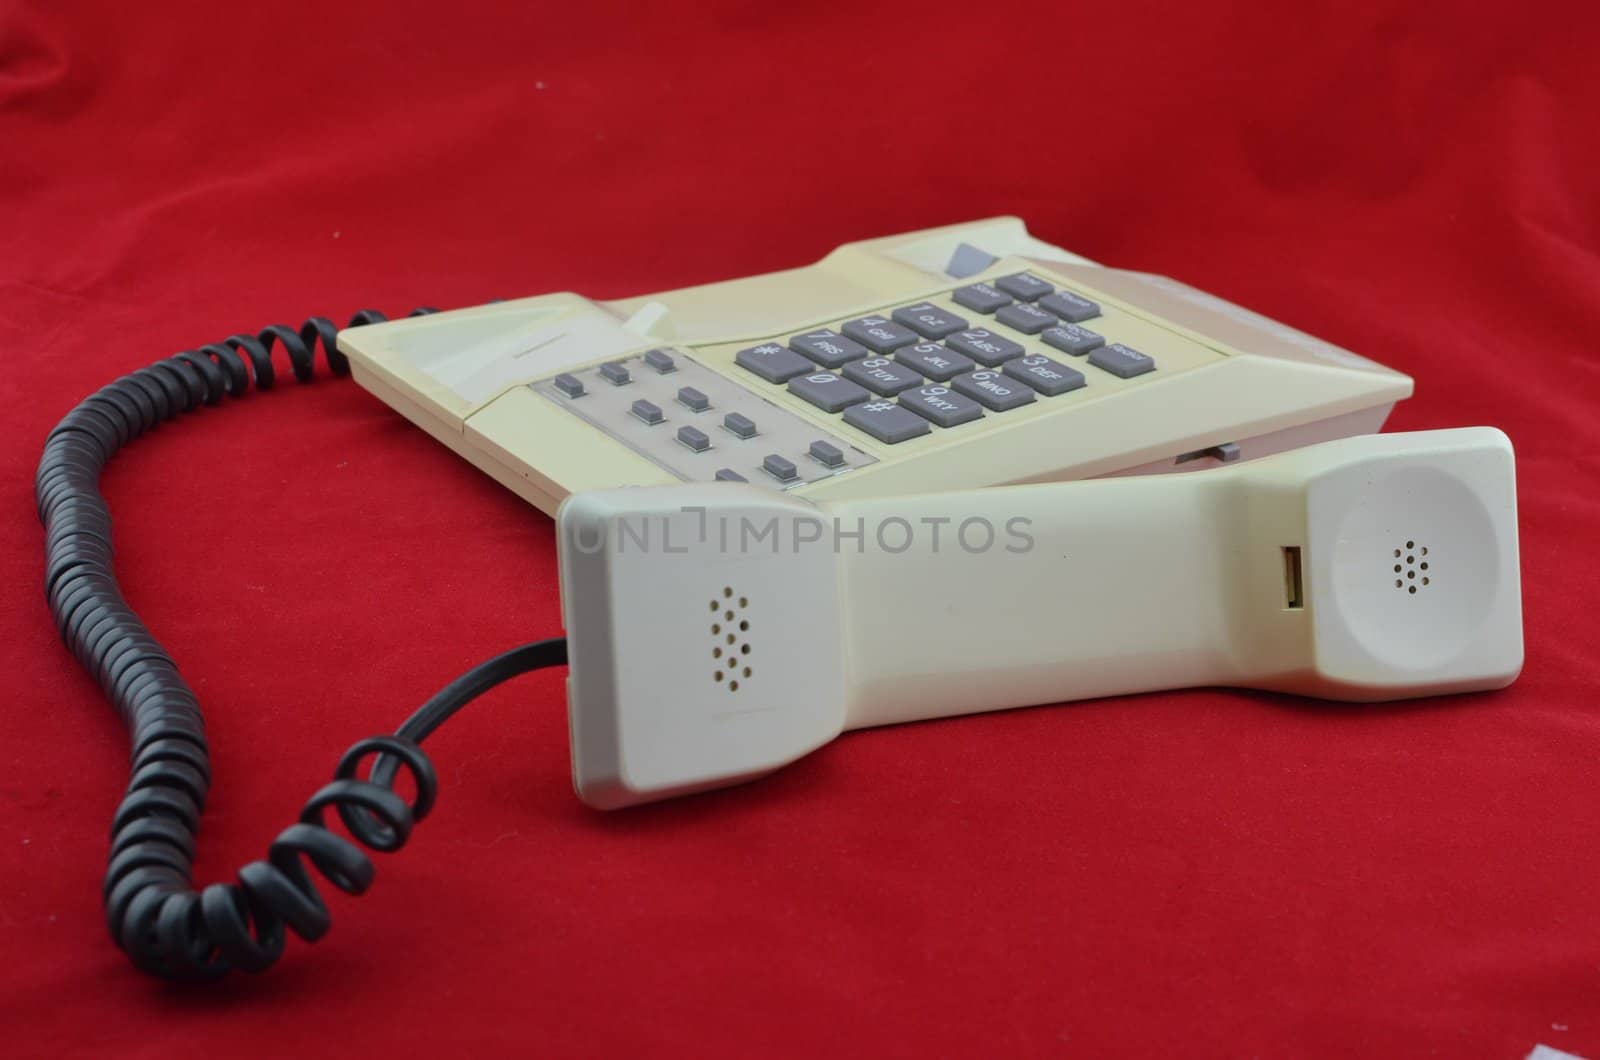 Telephone on red background